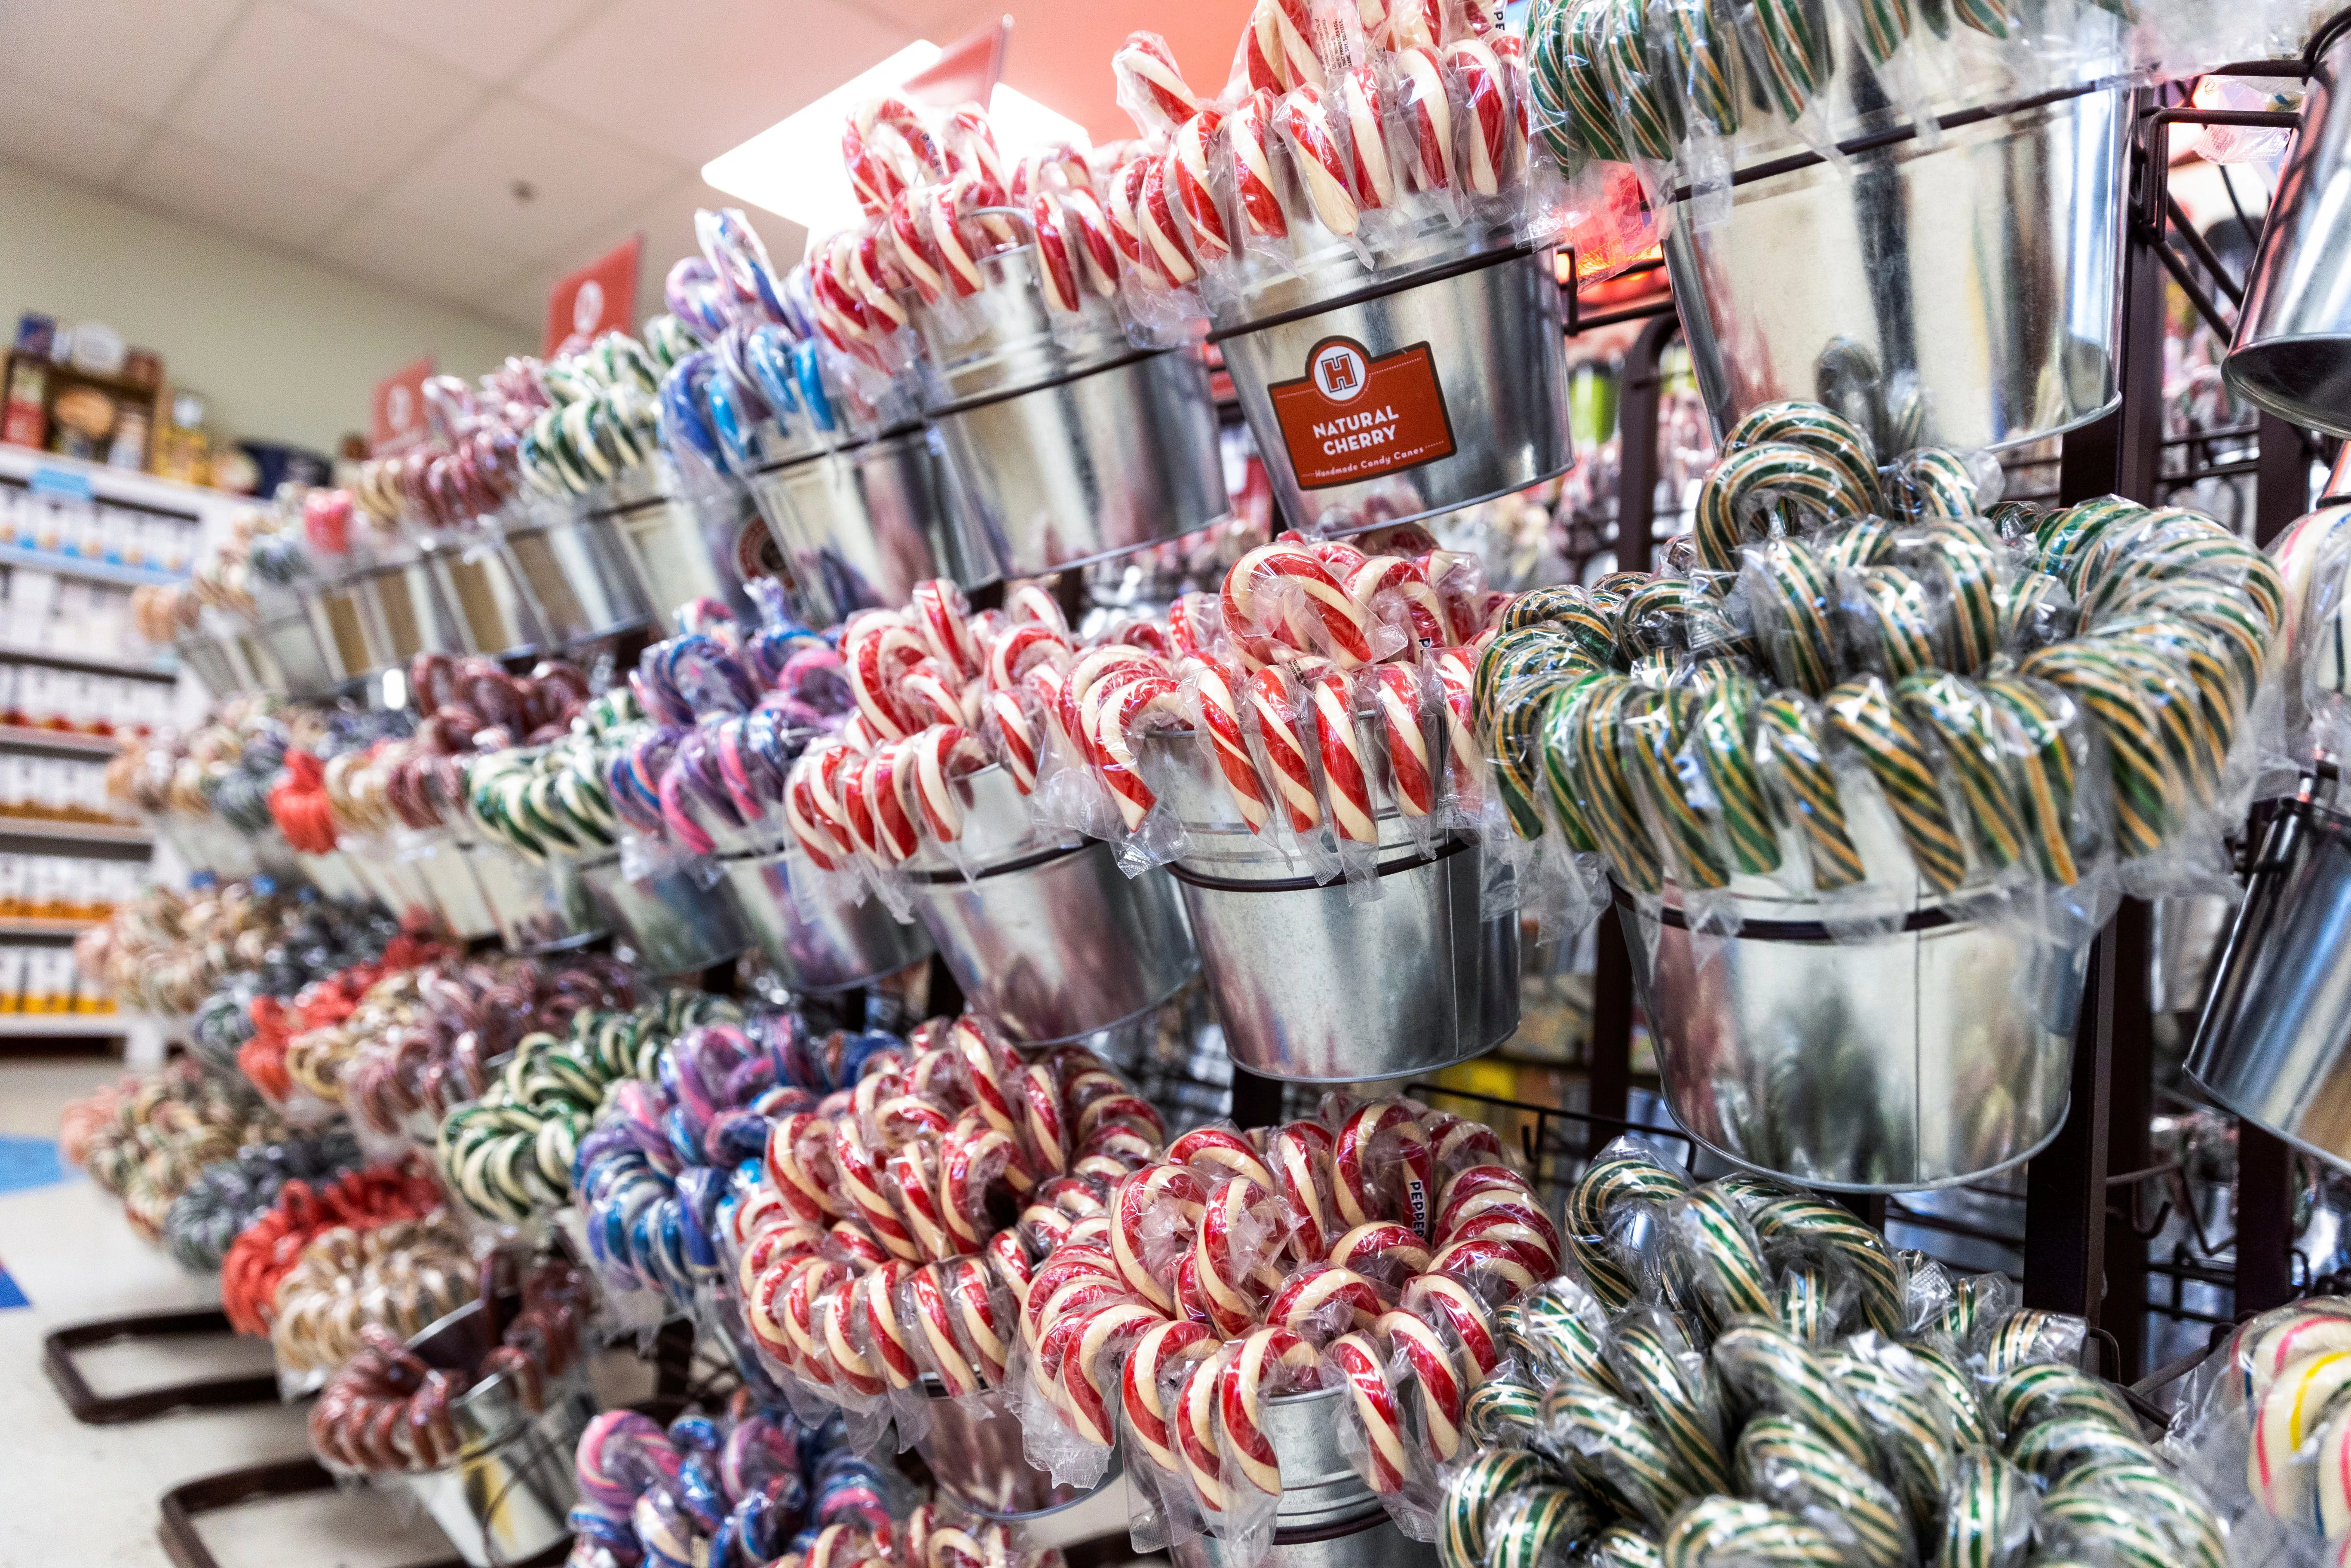 candy-cane-manufacturer-in-colorado-struggles-ahead-of-key-christmas-sales-season